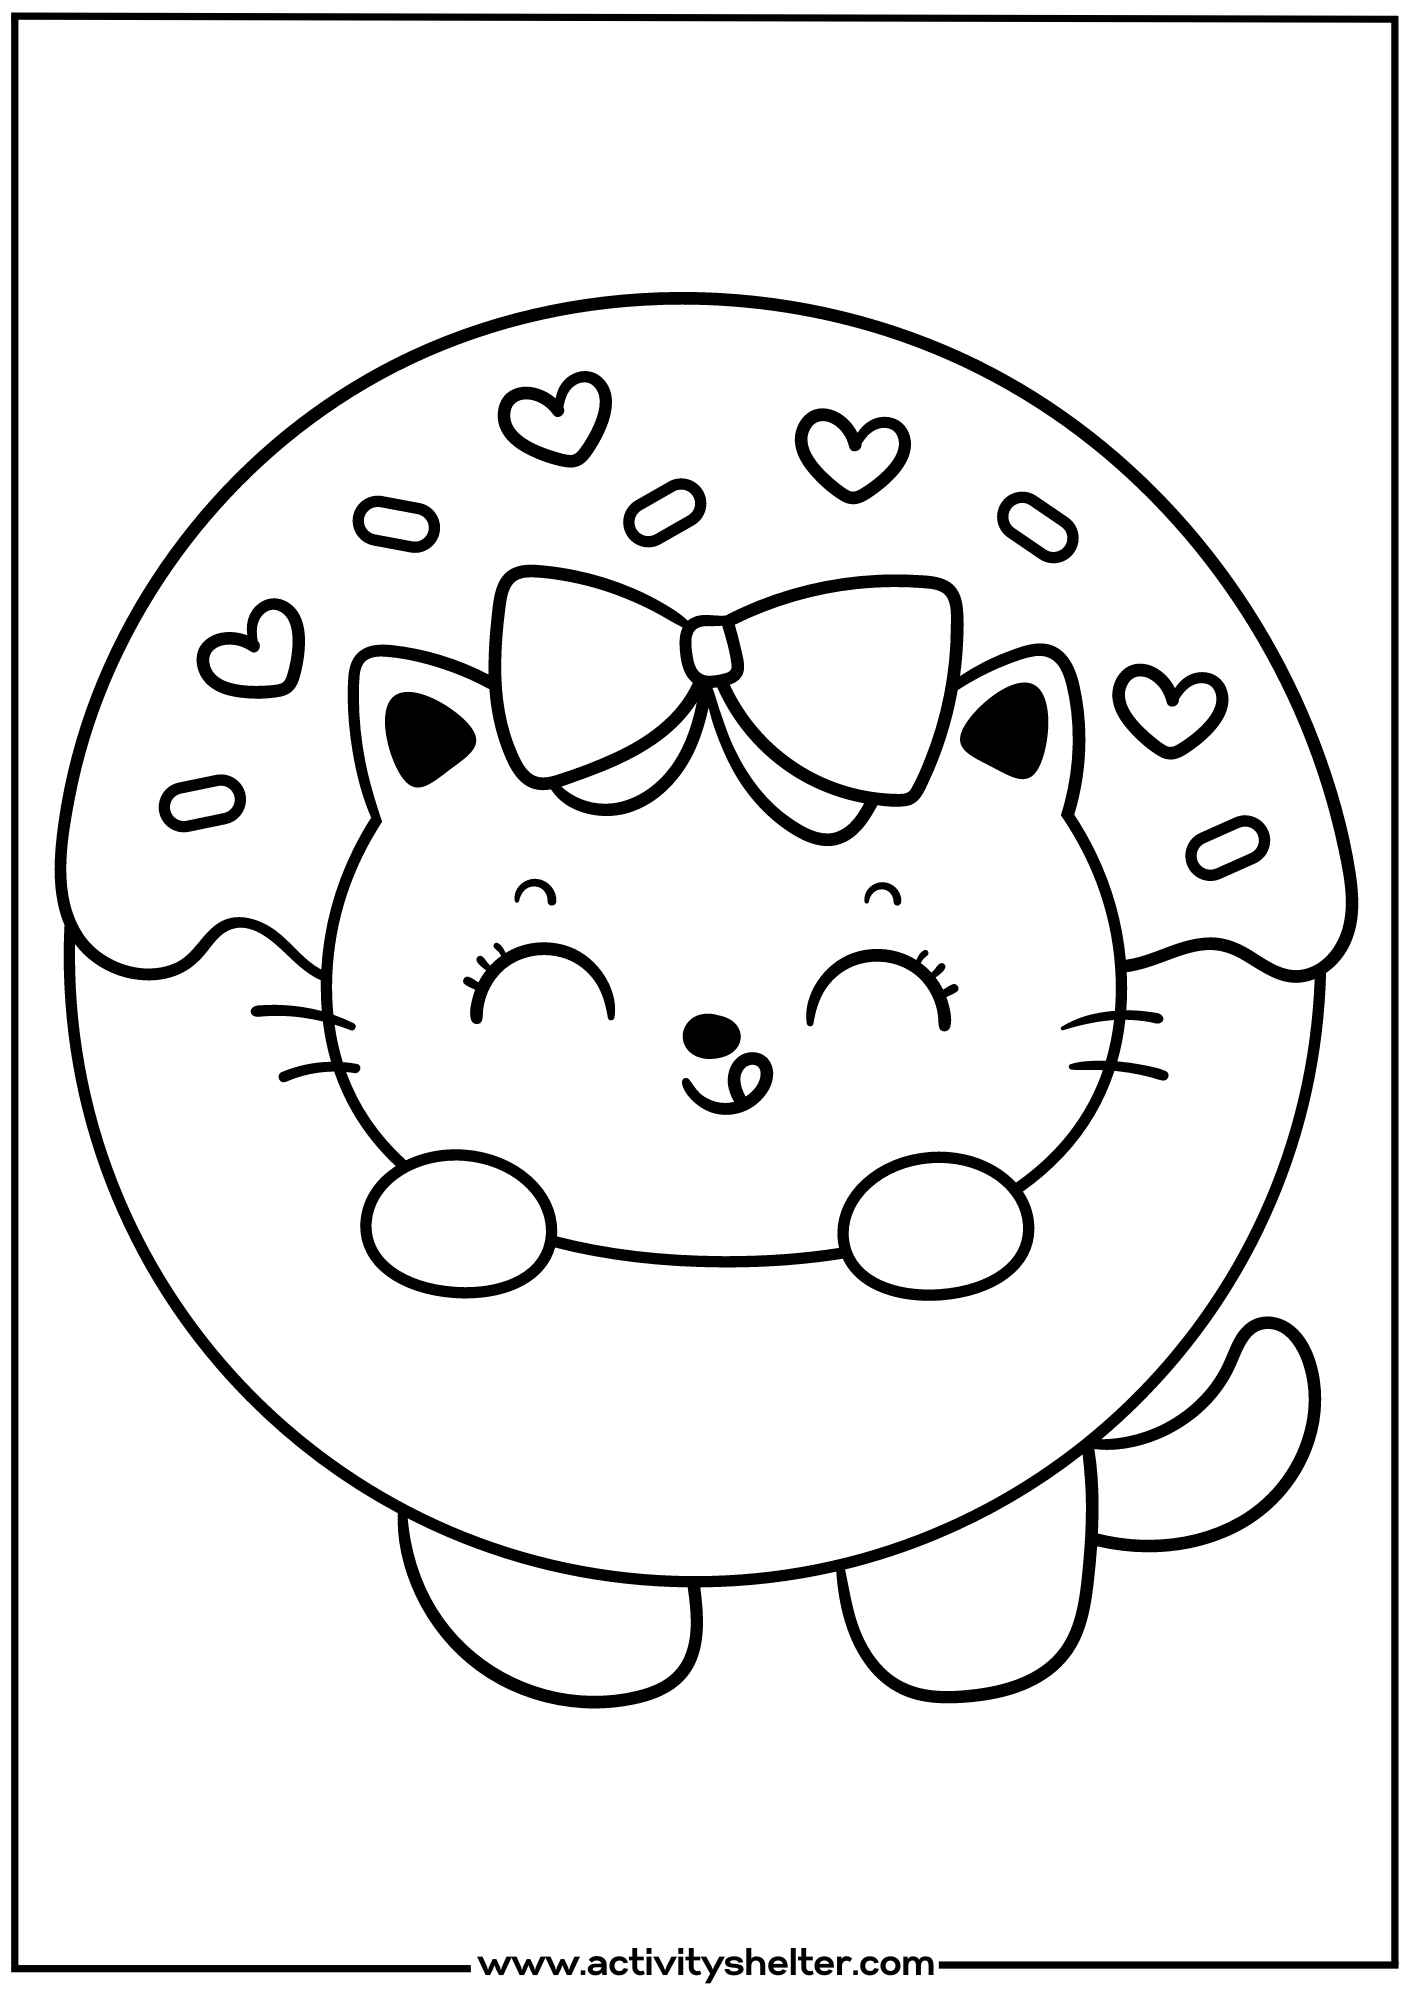 Cute Donut Coloring Page